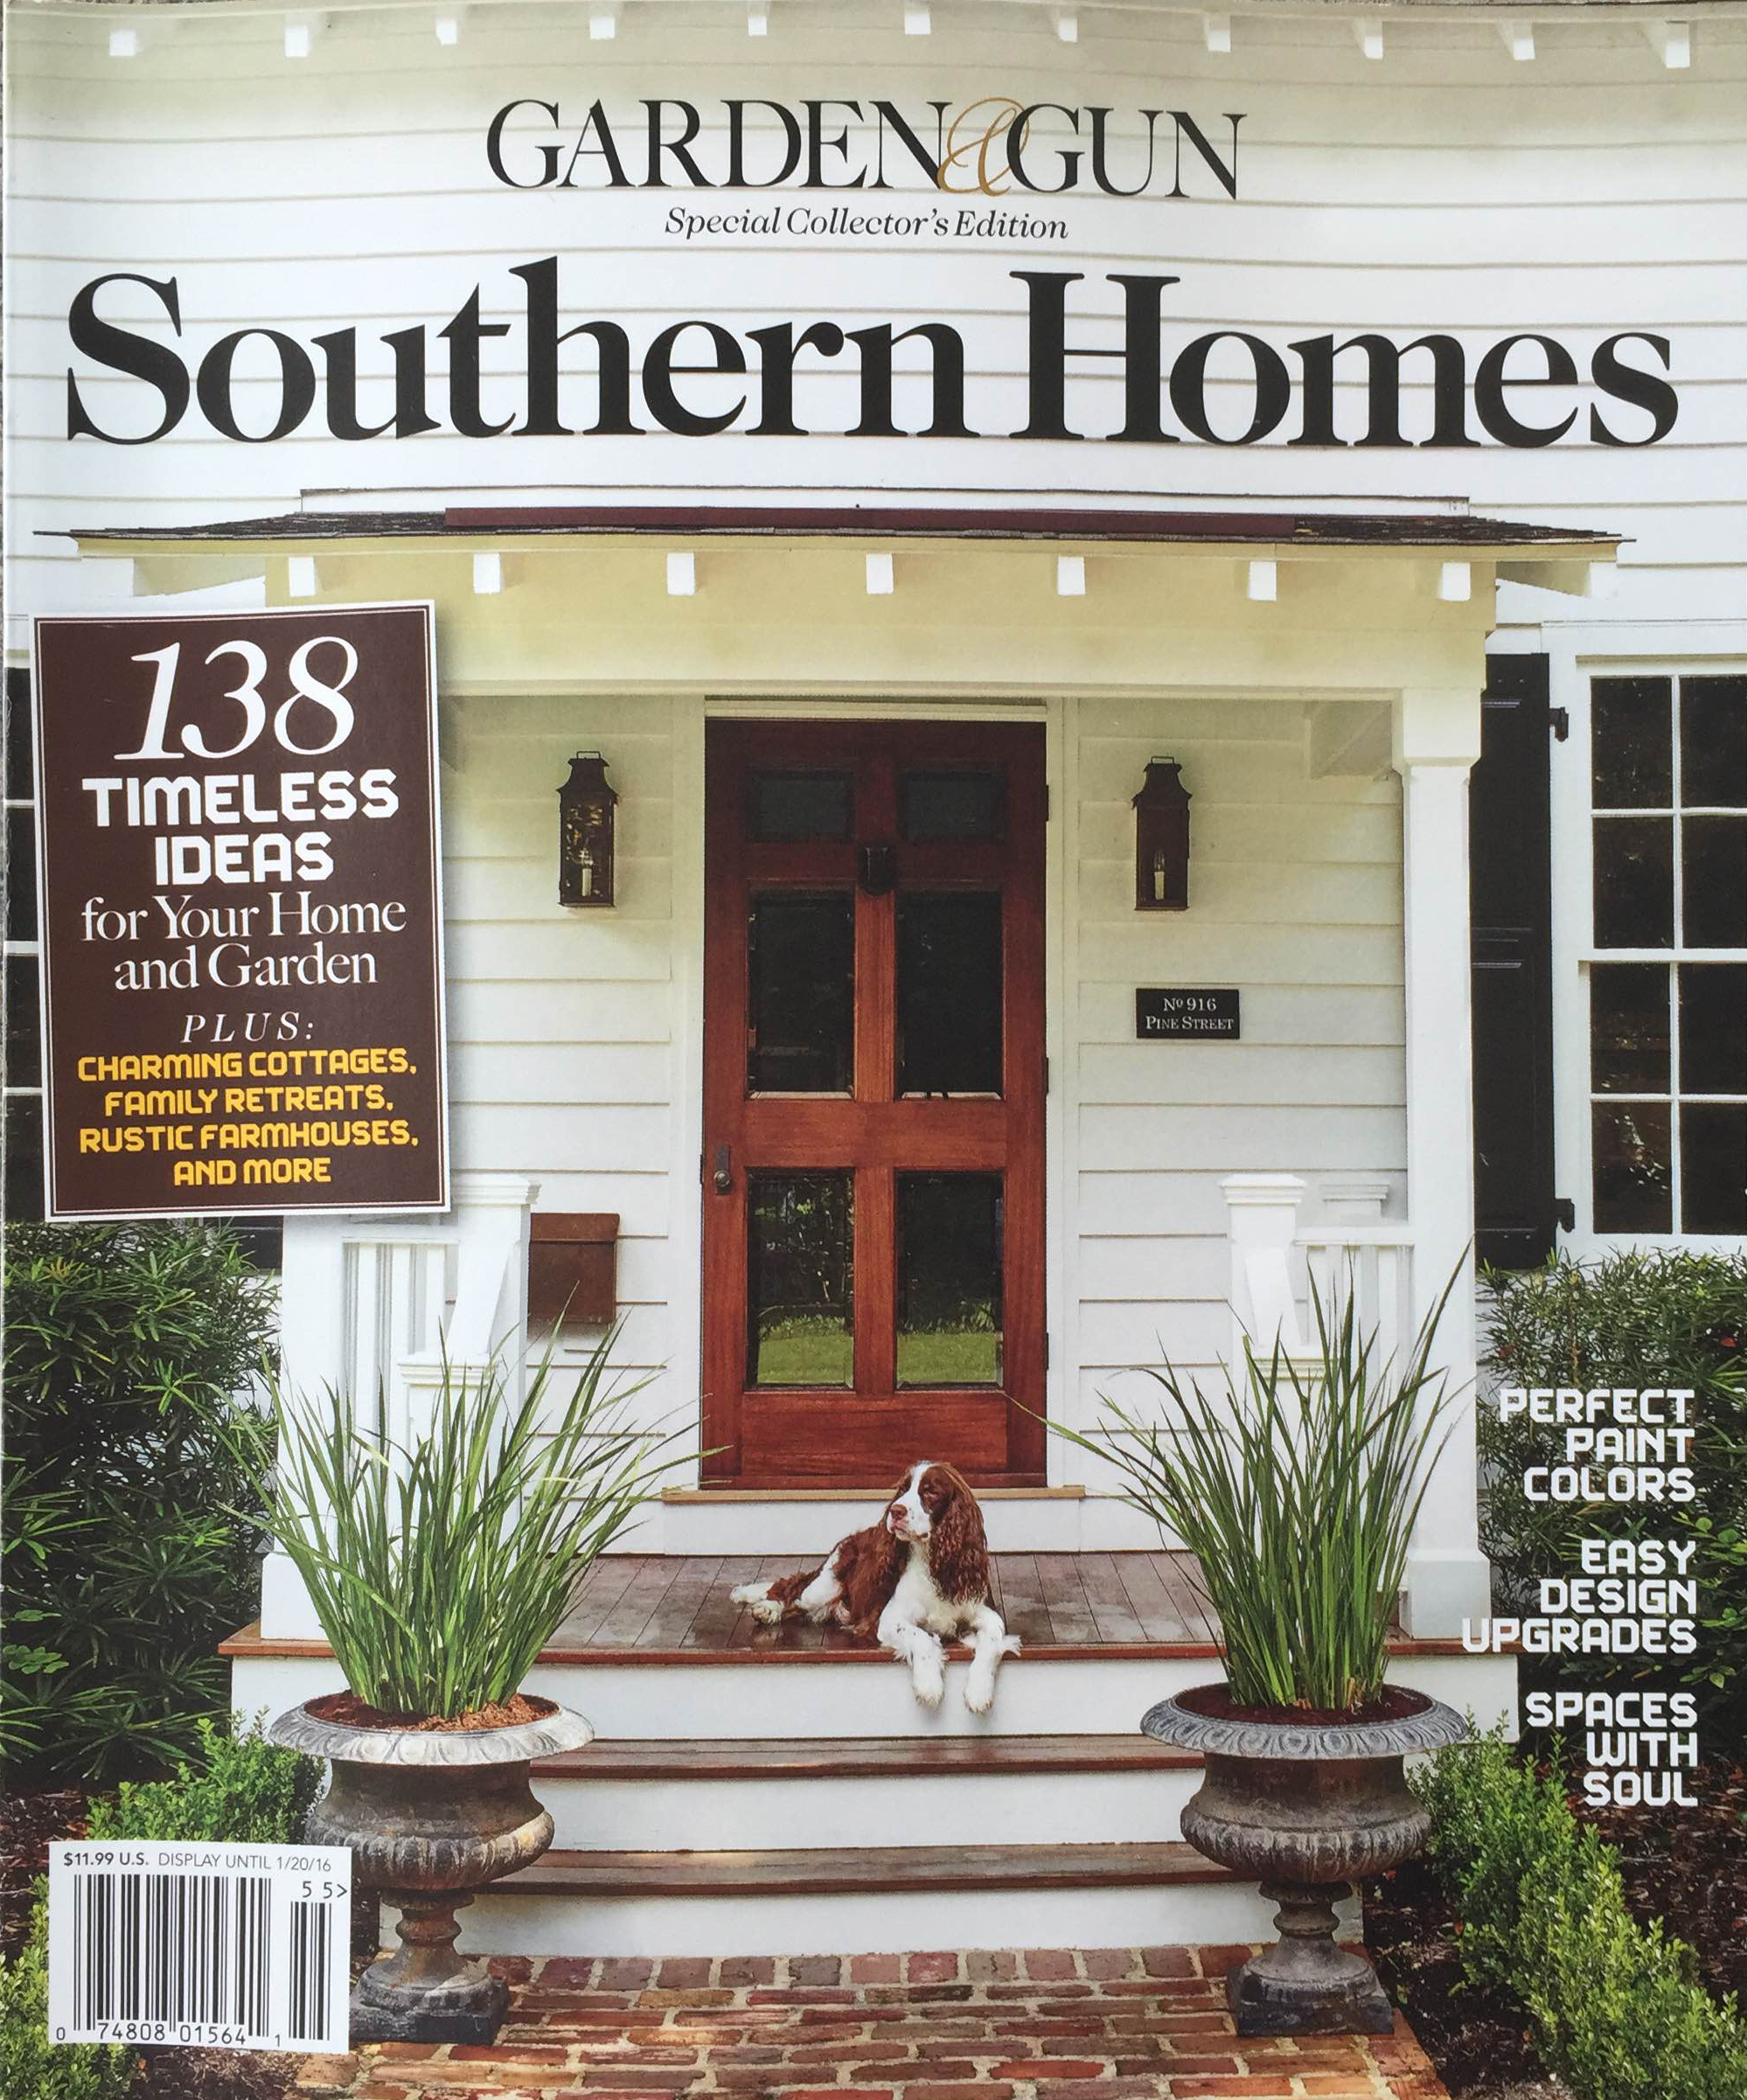 Patterned Wooden Tiles featured in GARDEN & GUN SPECIAL COLLECTOR'S EDITION SOUTHERN HOMES FALL 2015 #MirthStudio